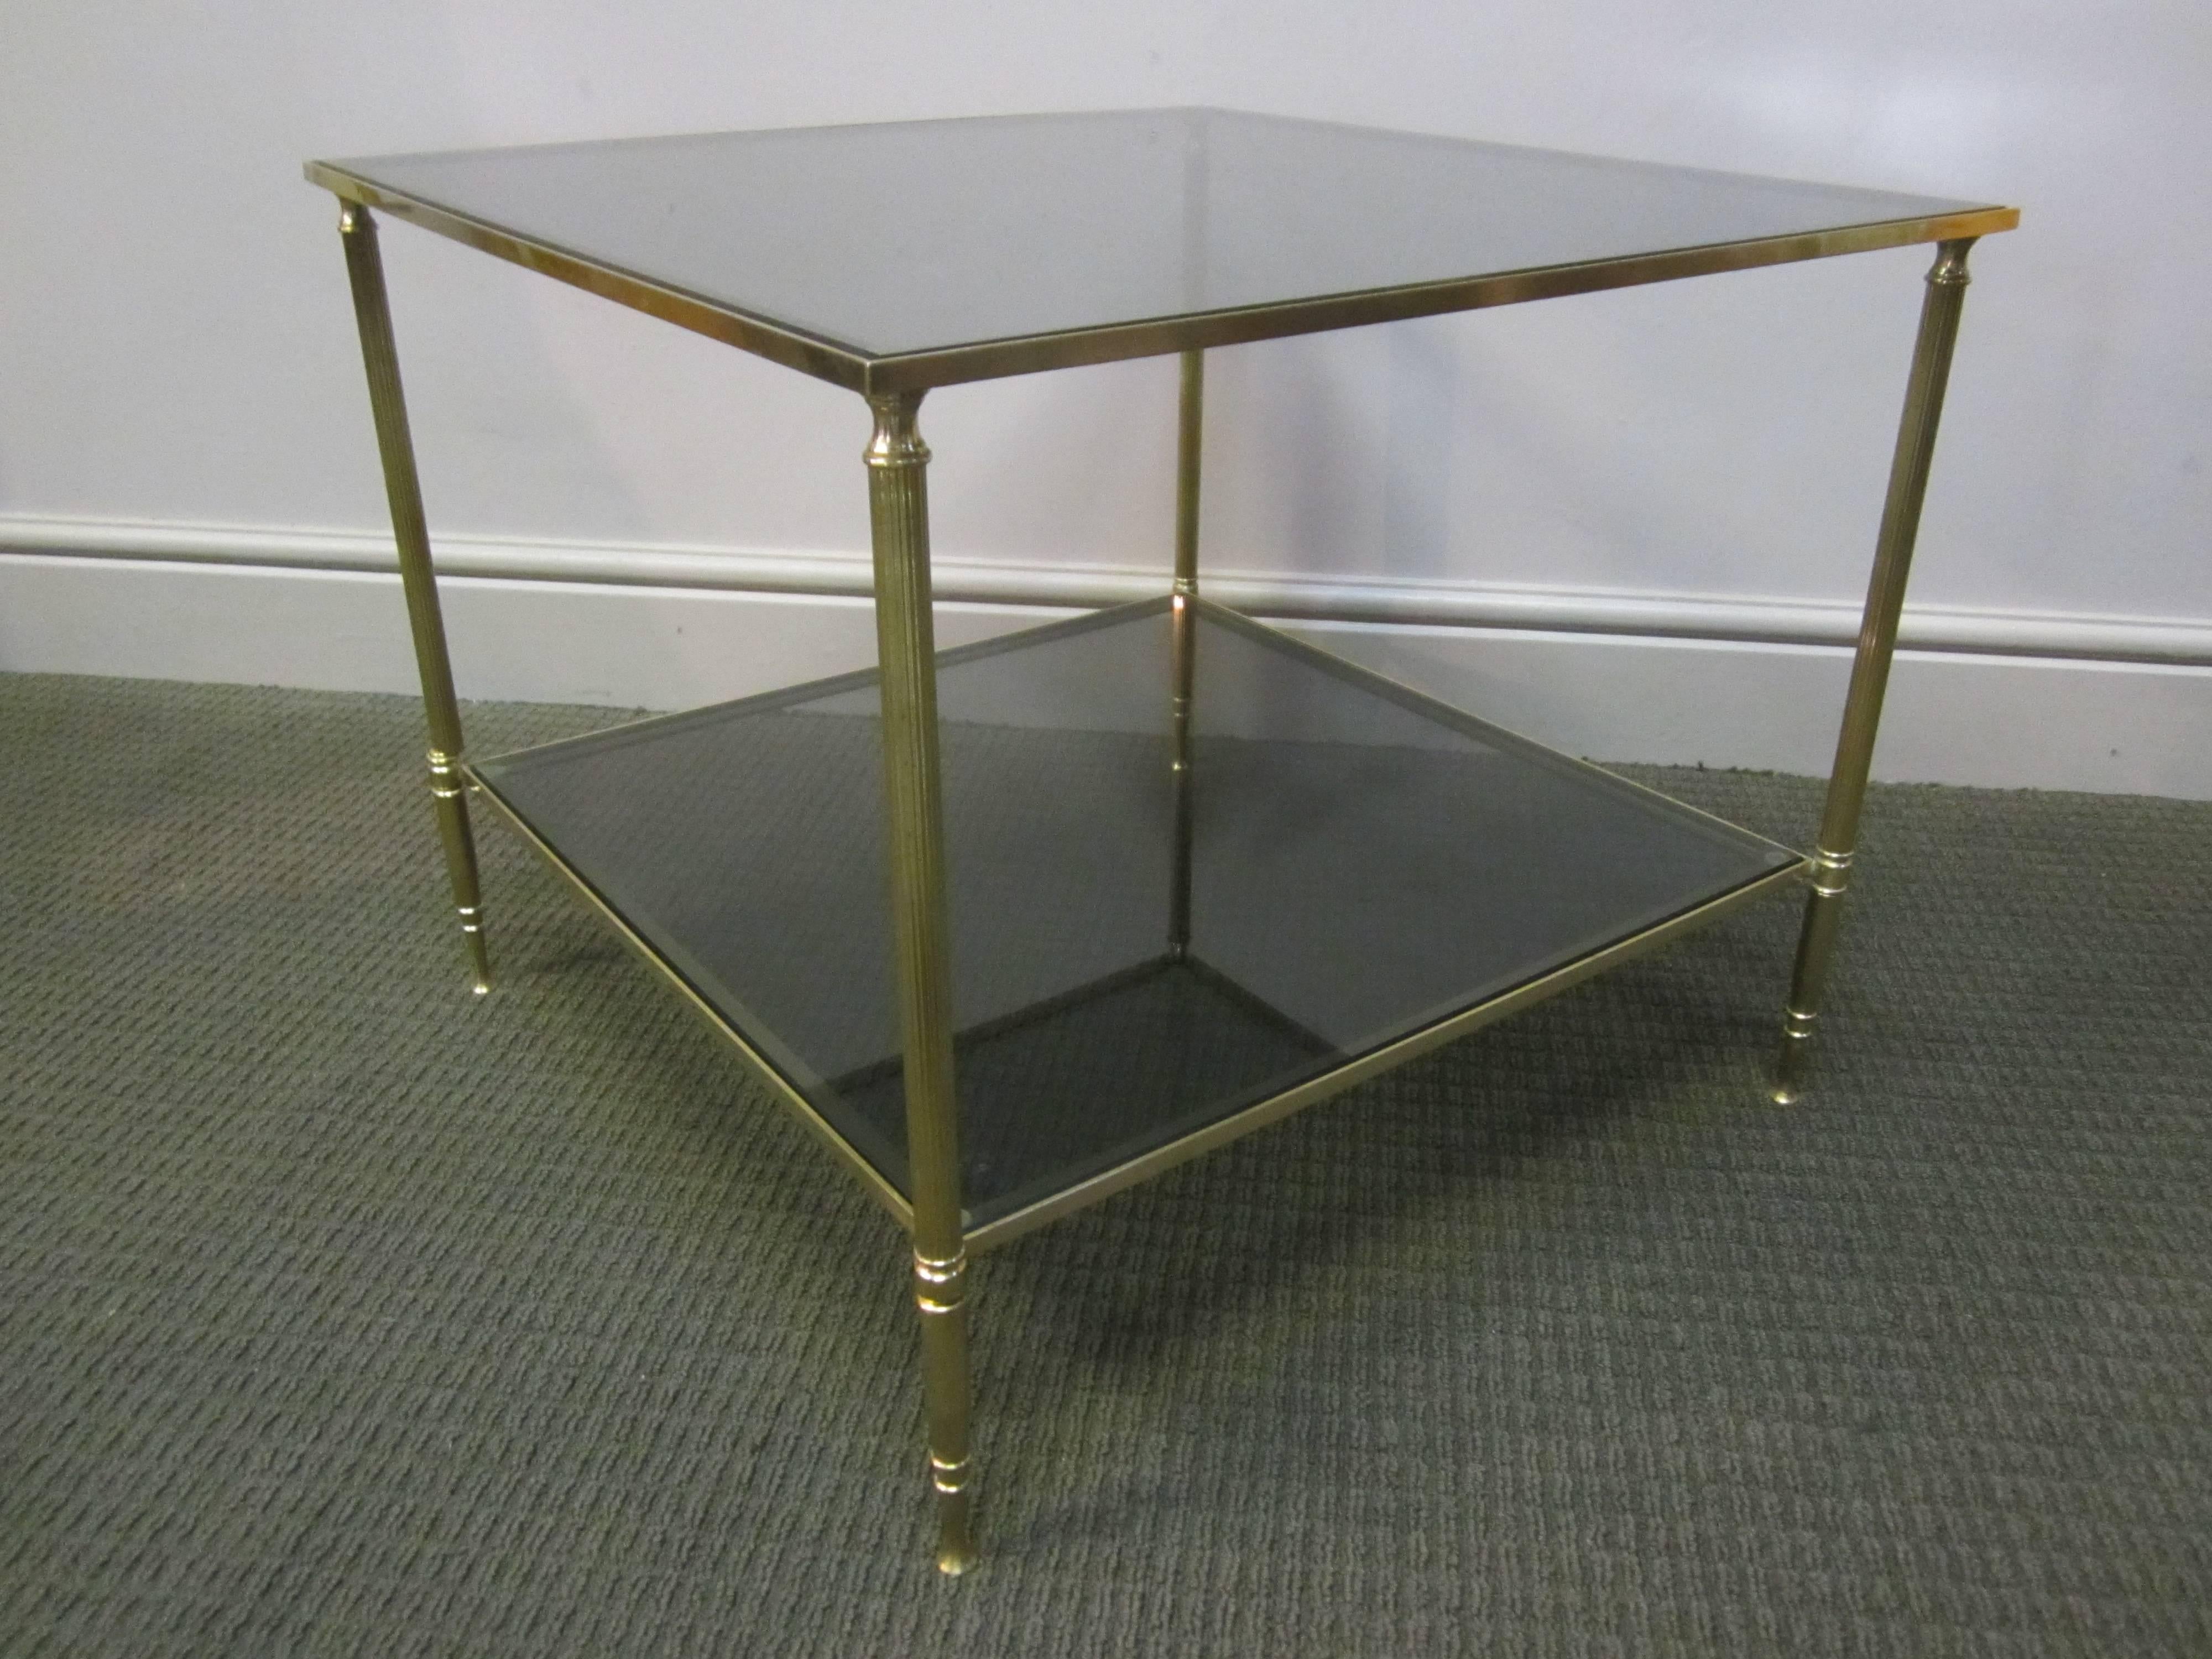 20th Century French Gilt Bronze Side Table